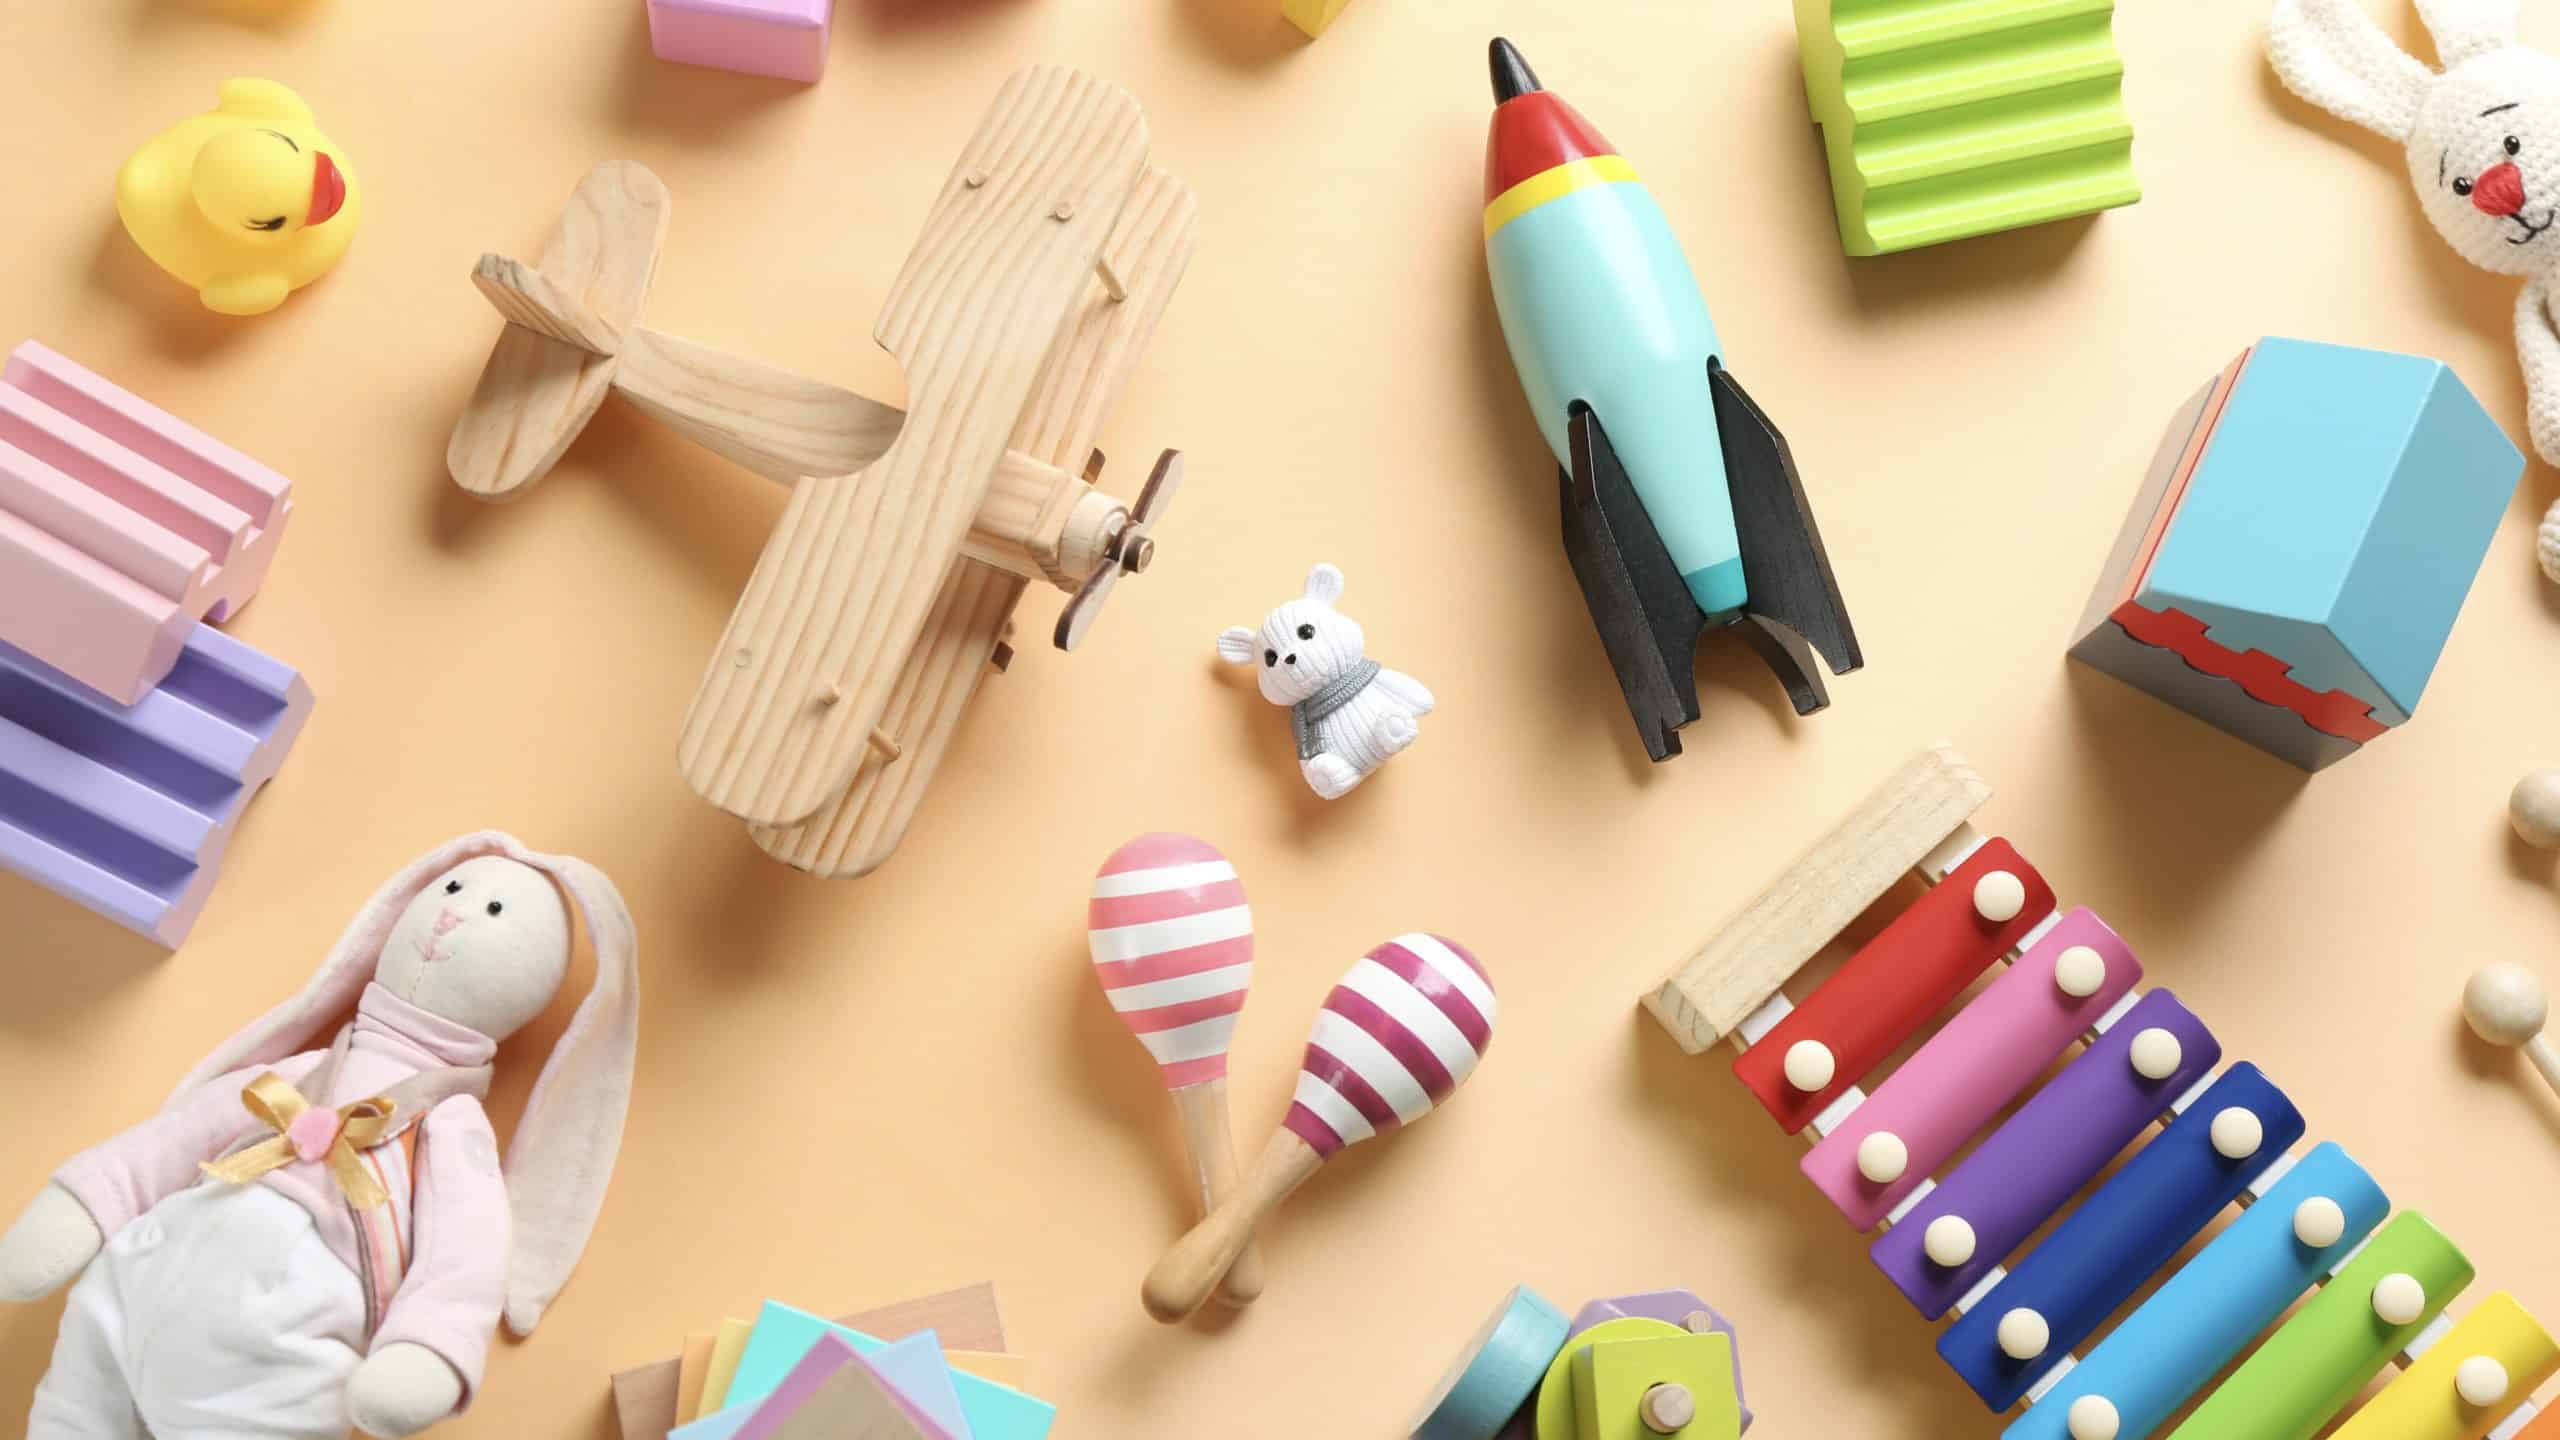 How to Manufacture a Toy: The Toy Manufacturing Process from A to Z